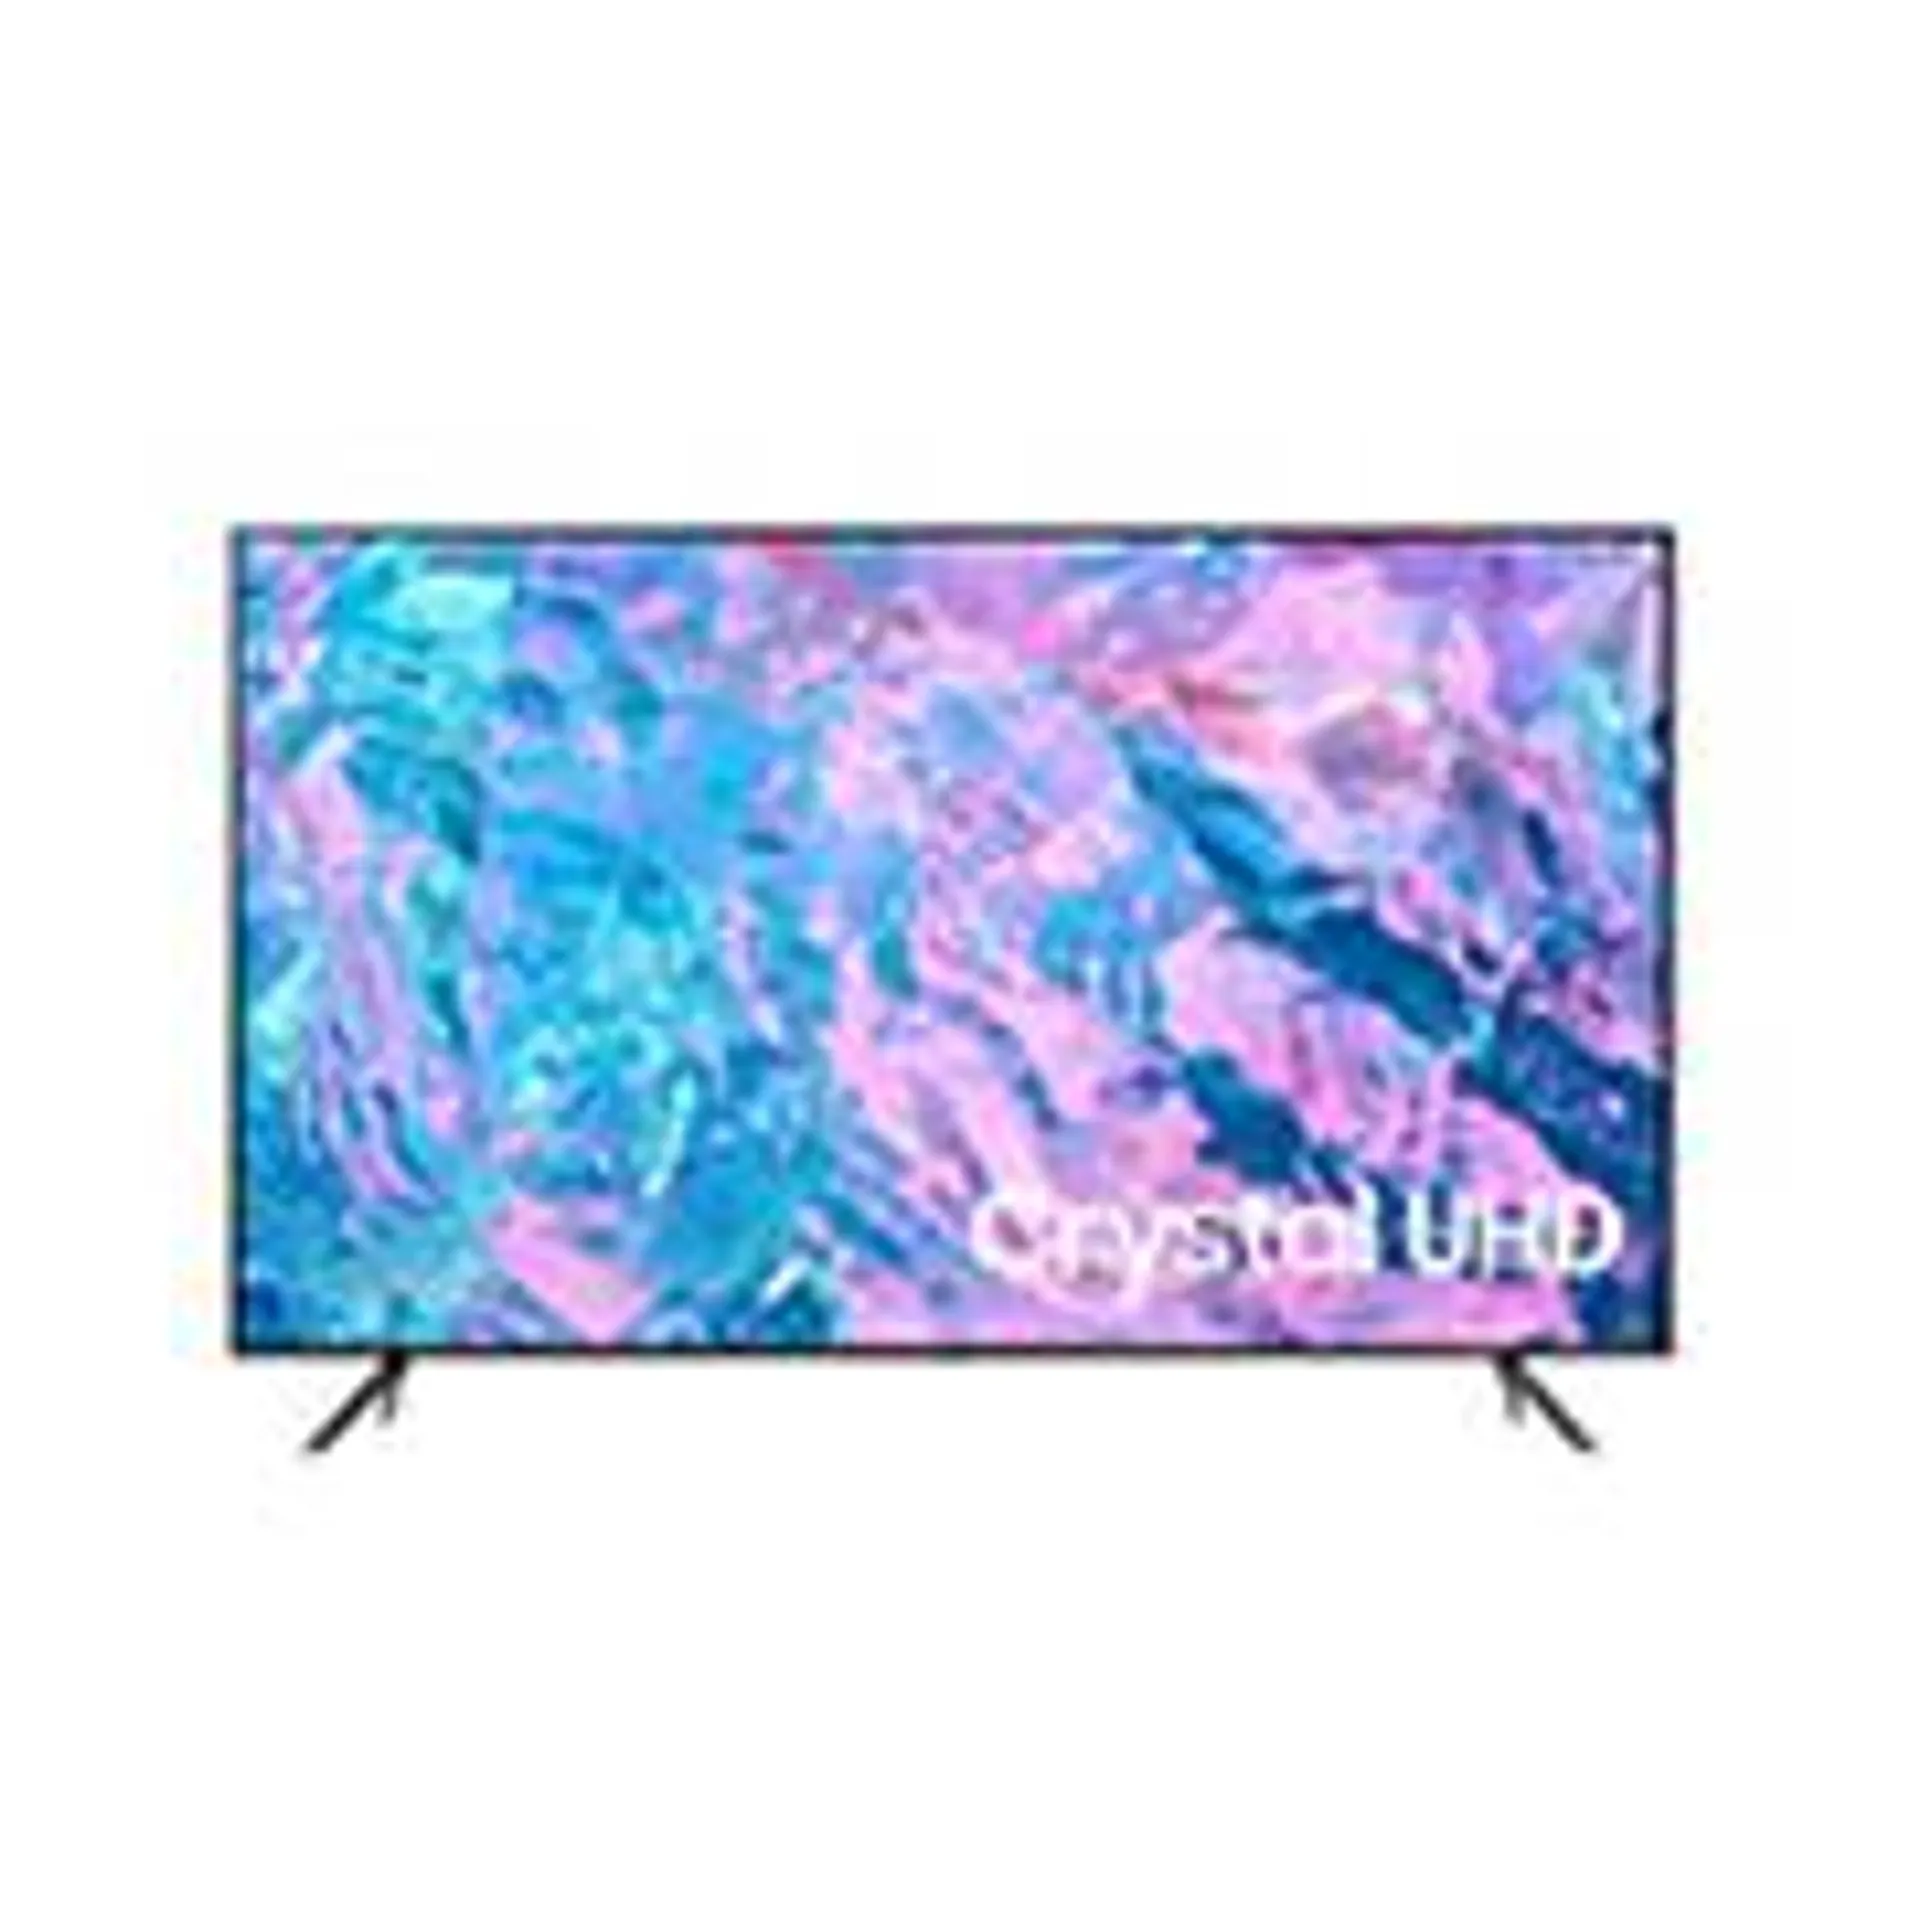 Samsung 55" CU7000 Crystal UHD 4K Smart TV with 4-Year Coverage